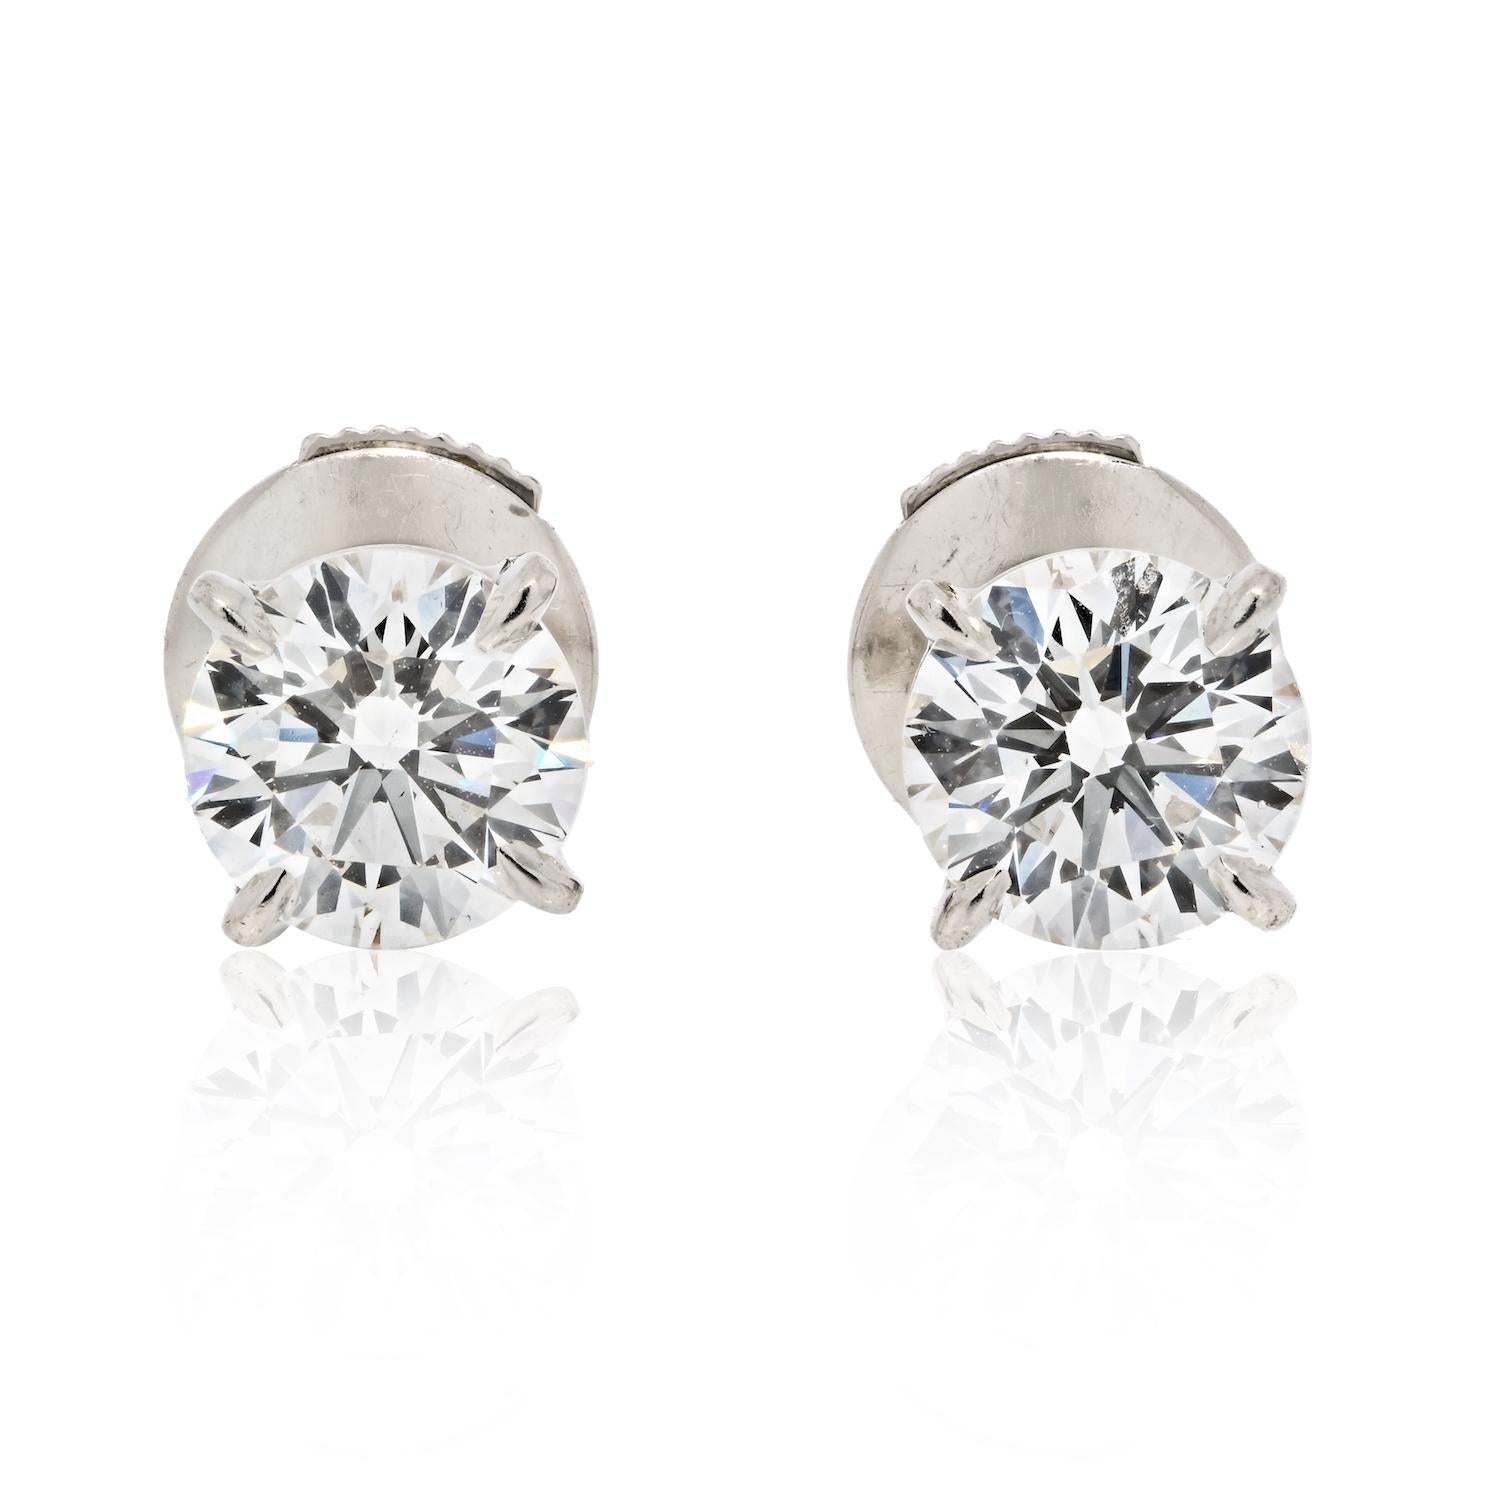 The Cartier 1.94cttw Round Cut Diamond Stud Earrings in platinum is a stunning pair of earrings that exude luxury and sophistication. 

Crafted by the renowned jewelry house of Cartier, these earrings are made with high-quality round cut diamonds